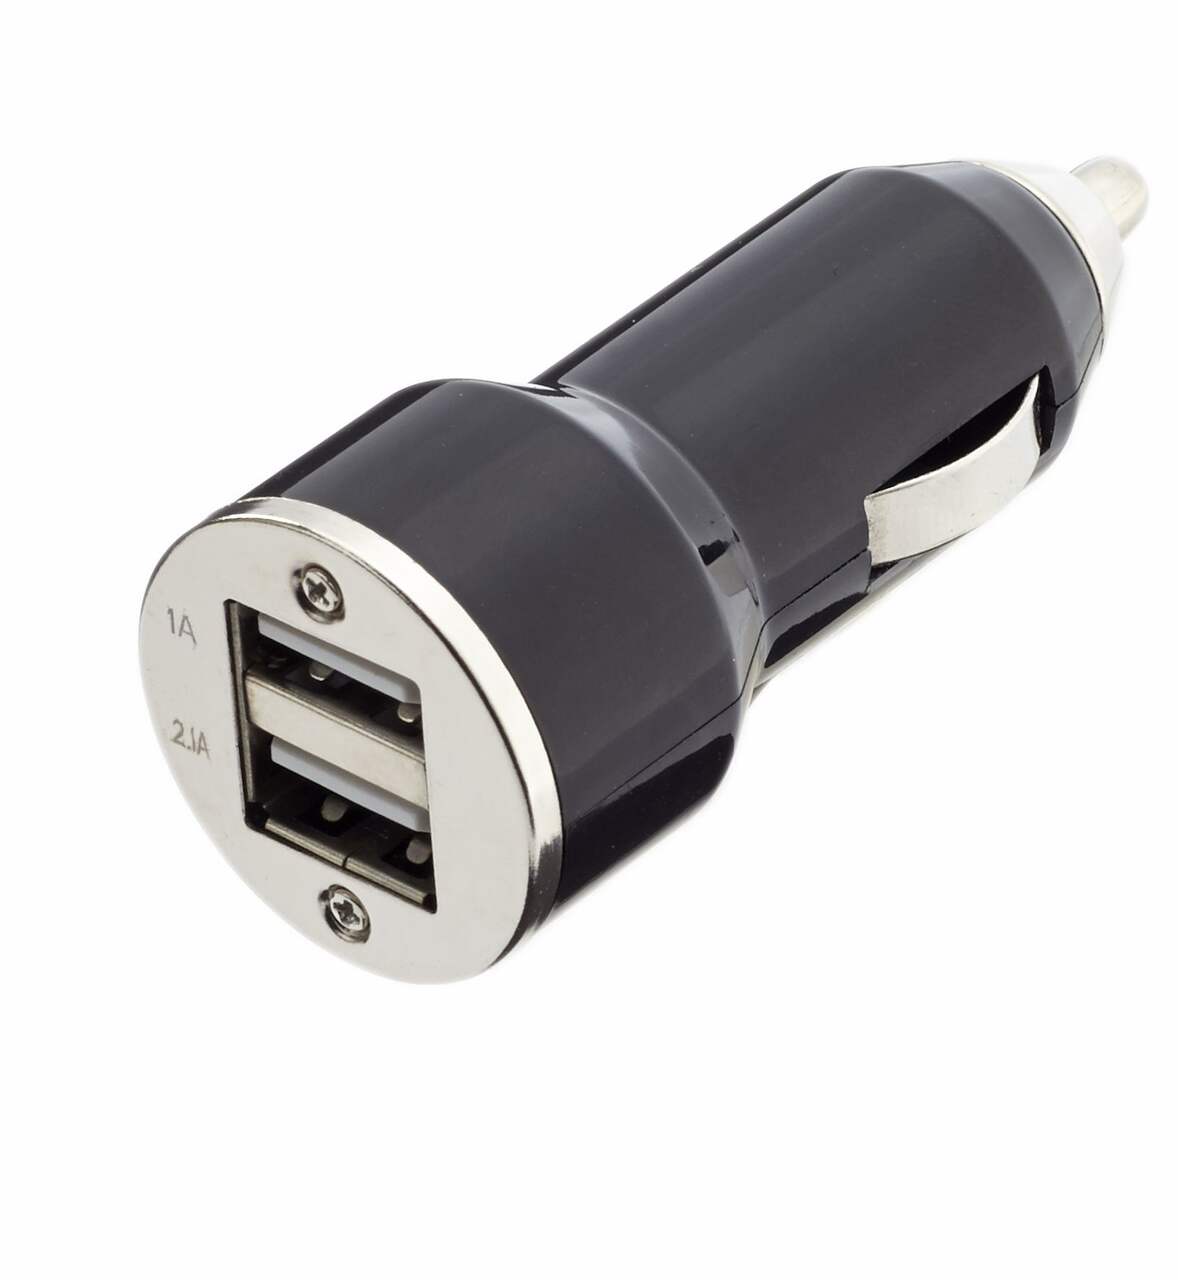 12V Dual USB Car Charger for iPhones, Android Smartphones